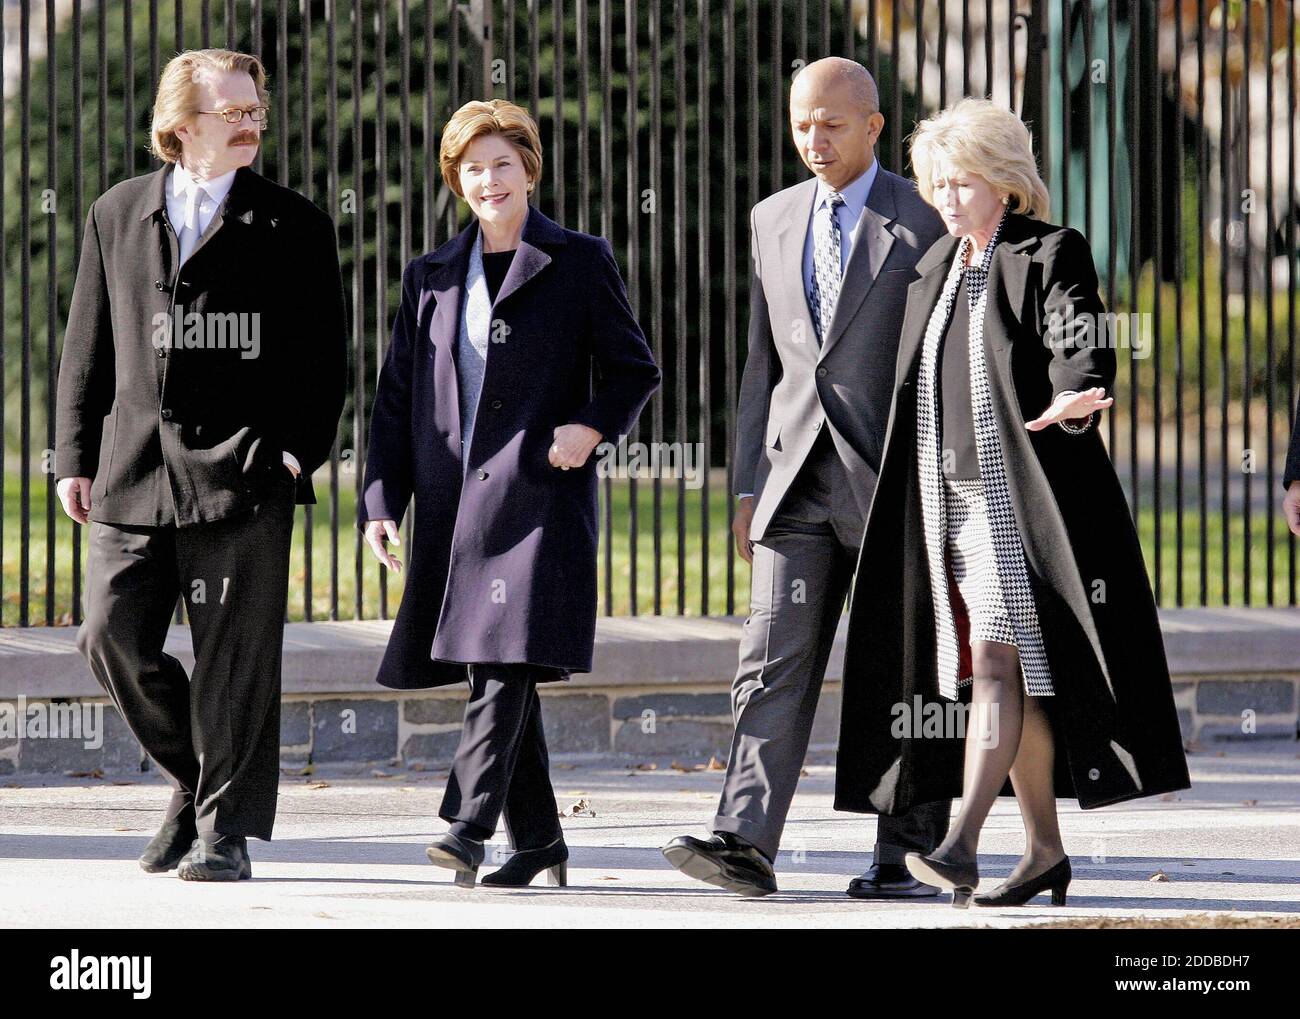 NO FILM, NO VIDEO, NO TV, NO DOCUMENTARY - Mrs. Laura Bush, second from left, is joined by landscape designer Michael Van Valkenburgh, left, Tony Williams, Mayor of Washington, D.C. and Mary Peters, Administrator of the Federal Highway Commission, right, in front of the White House during a ceremony to re-open Pennsylvania Avenue to pedestrian traffic, on November 9, 2004, in Washington, D.C., USA. Photo by Chuck Kennedy/US News Story Slugged/KRT/ABACA. Stock Photo